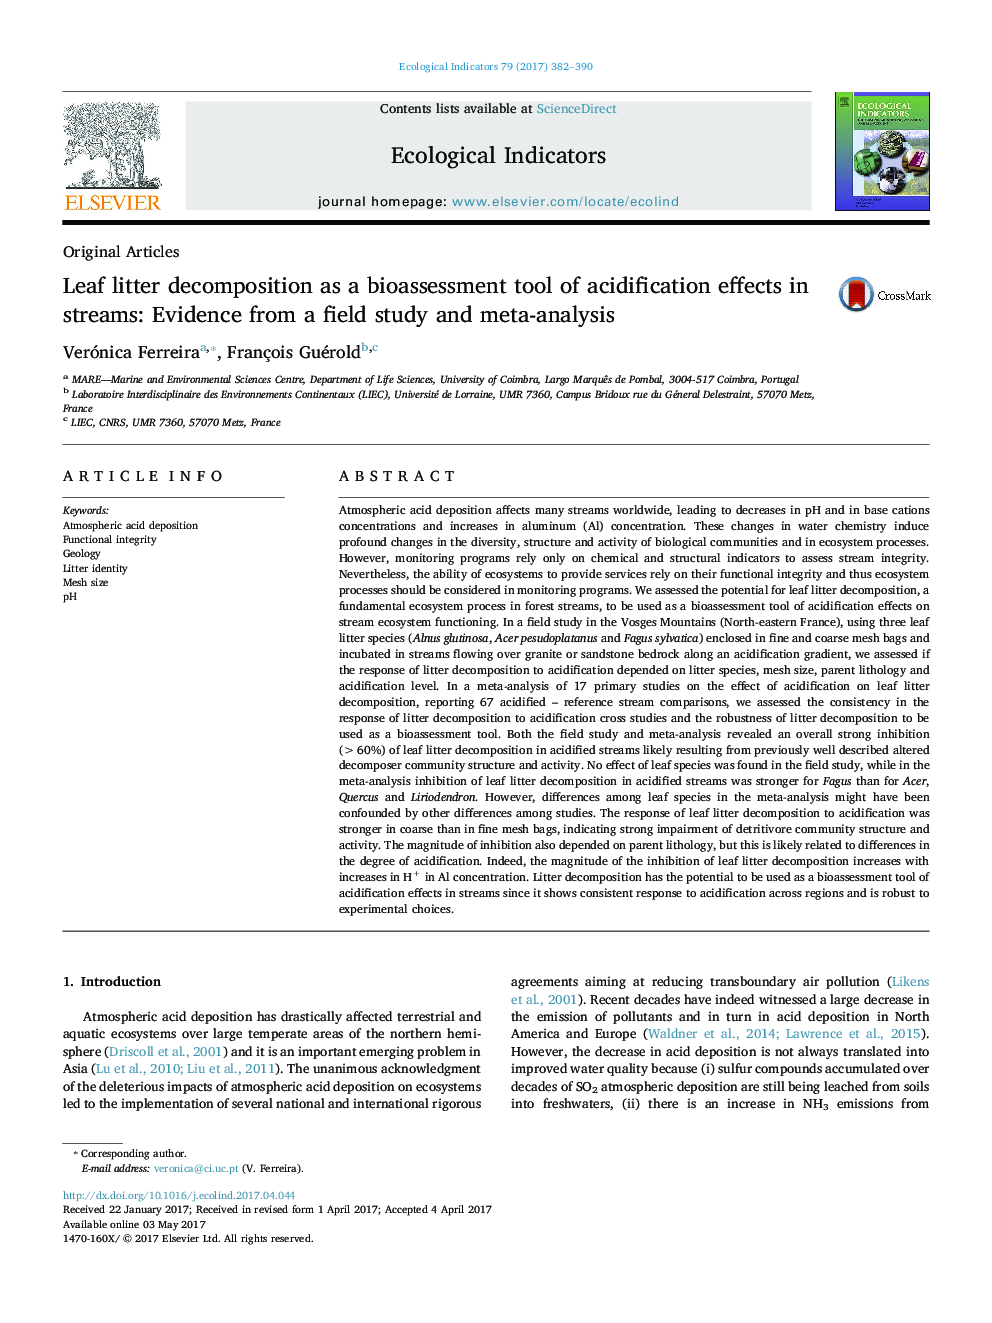 Original ArticlesLeaf litter decomposition as a bioassessment tool of acidification effects in streams: Evidence from a field study and meta-analysis